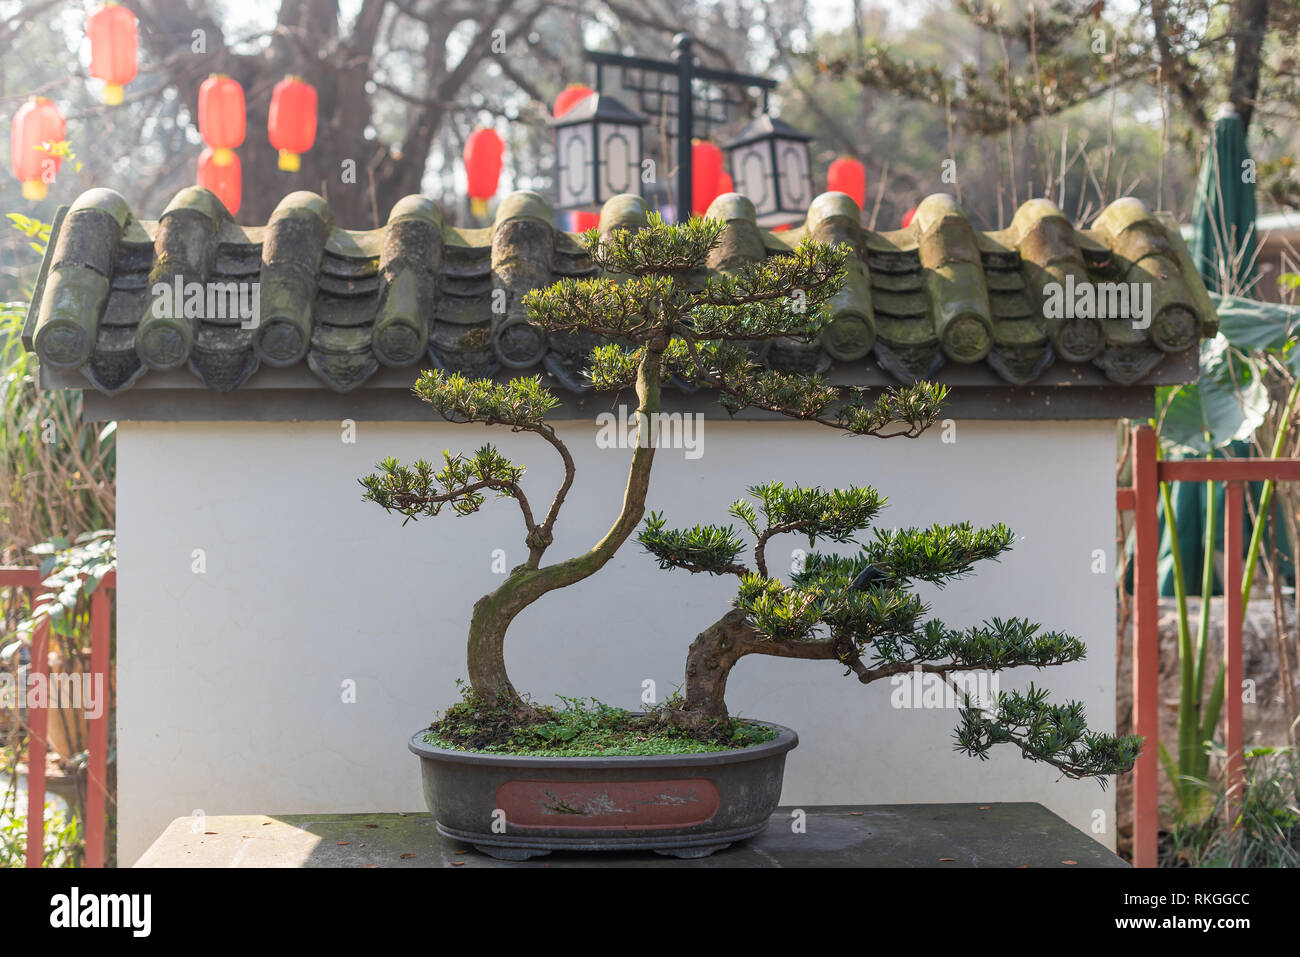 Twisted pine bonsai tree on a stone table against white wall and chinese lanterns in Baihuatan public park, Chengdu, Sichuan province, China Stock Photo